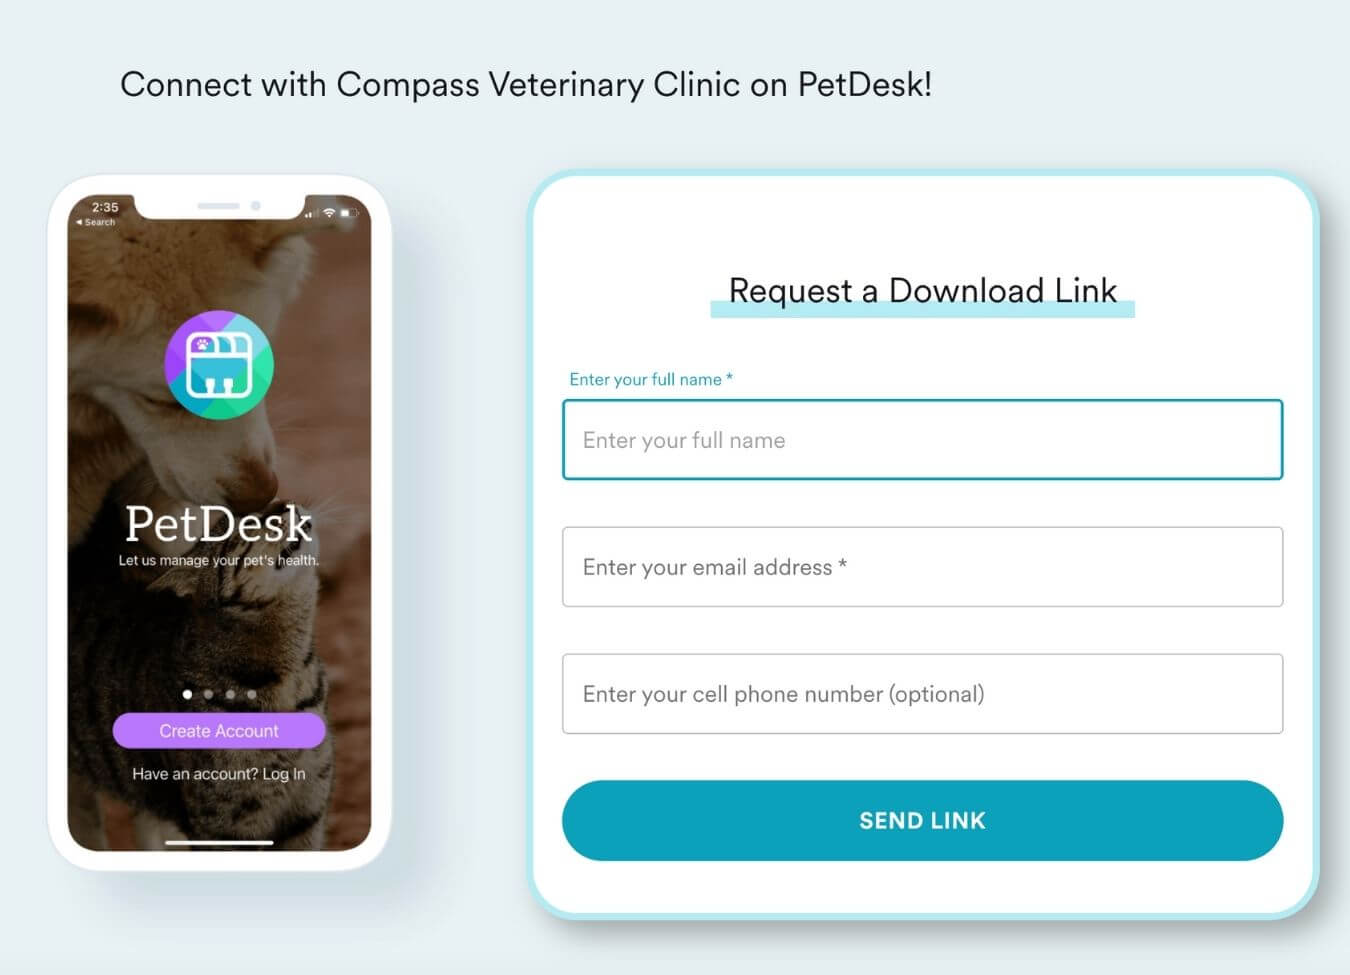 Compass Veterinary Clinic - Reliable Resources